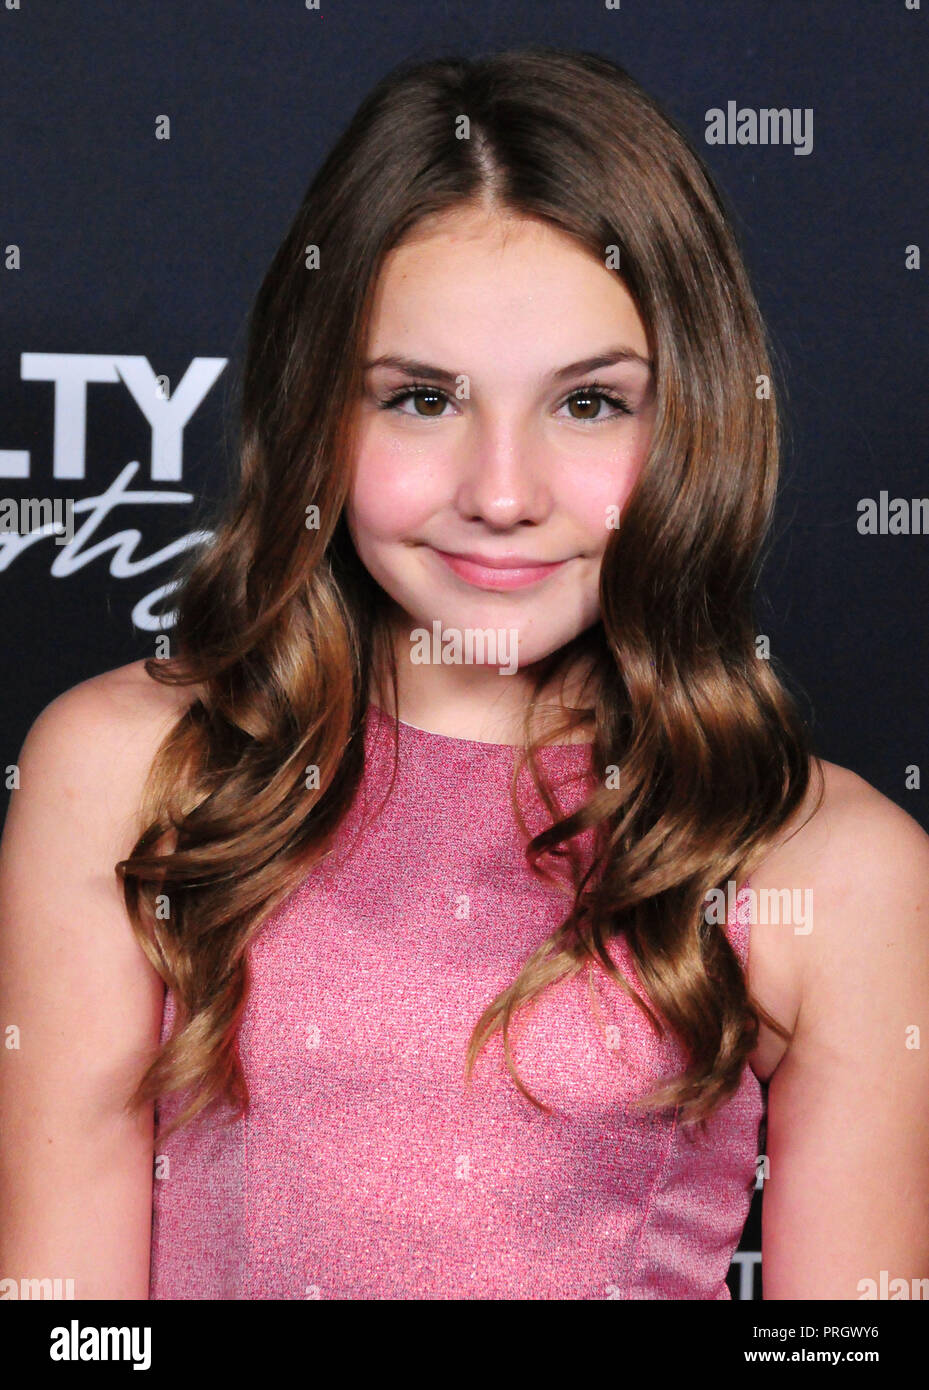 Los angeles california usa nd october actress piper rockelle attends att hello labs guilty party history of lying season premiere on october at arclight hollywood in los angeles